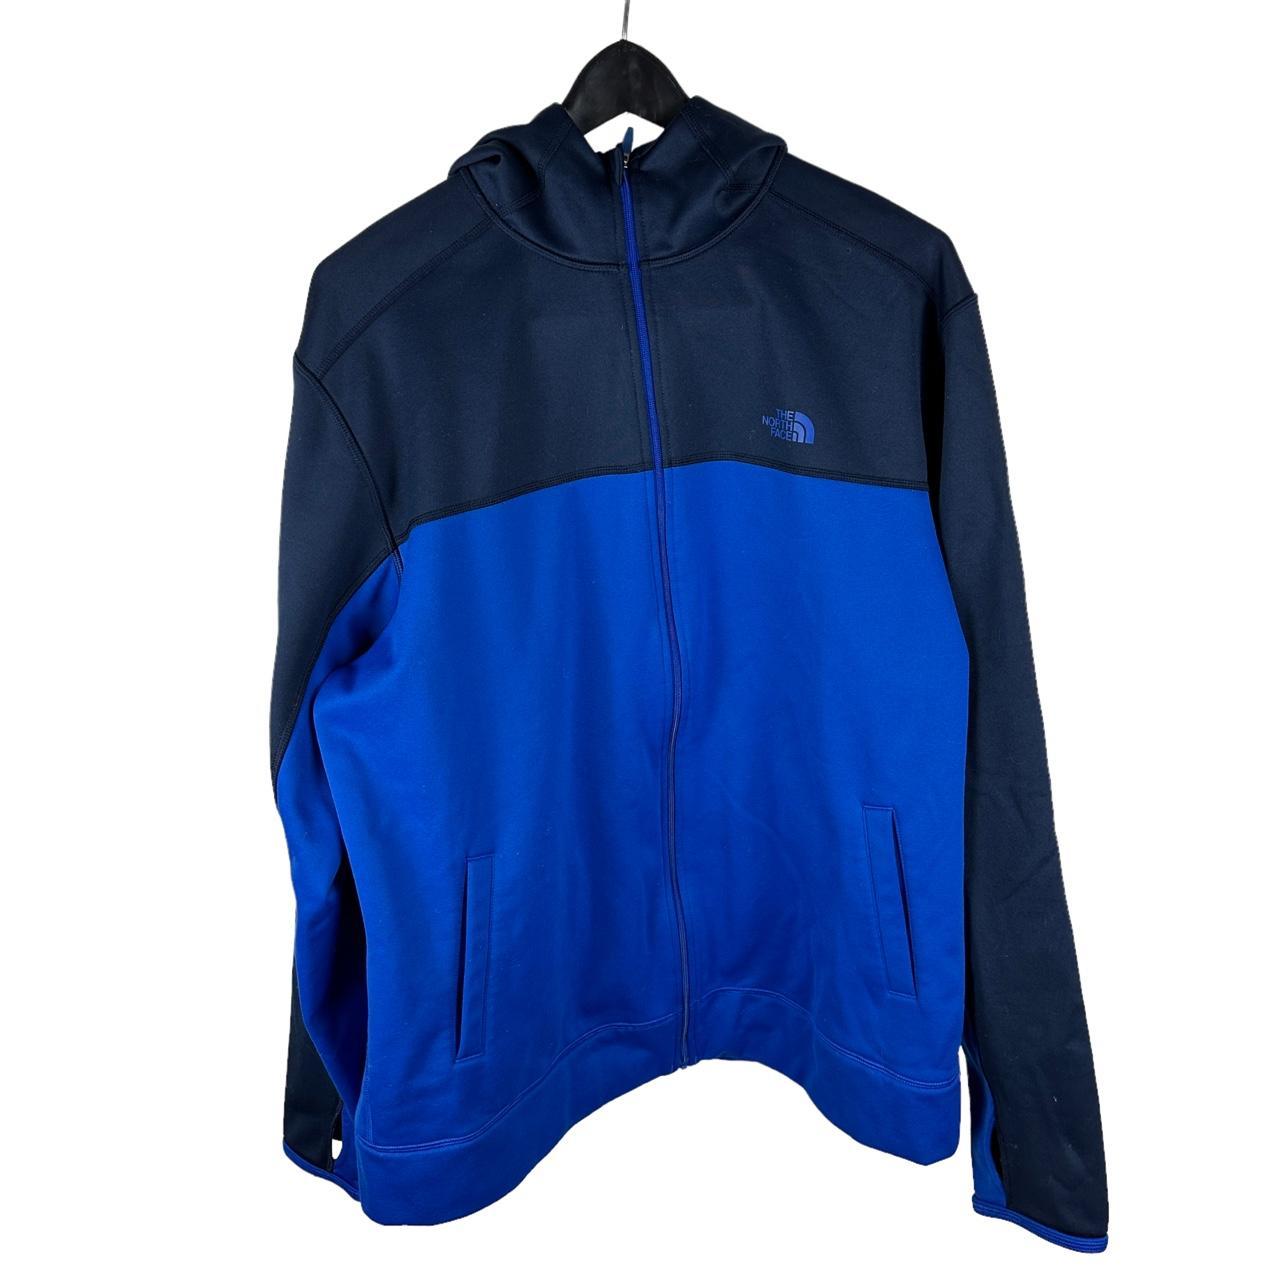 The North Face Men's Hoodie